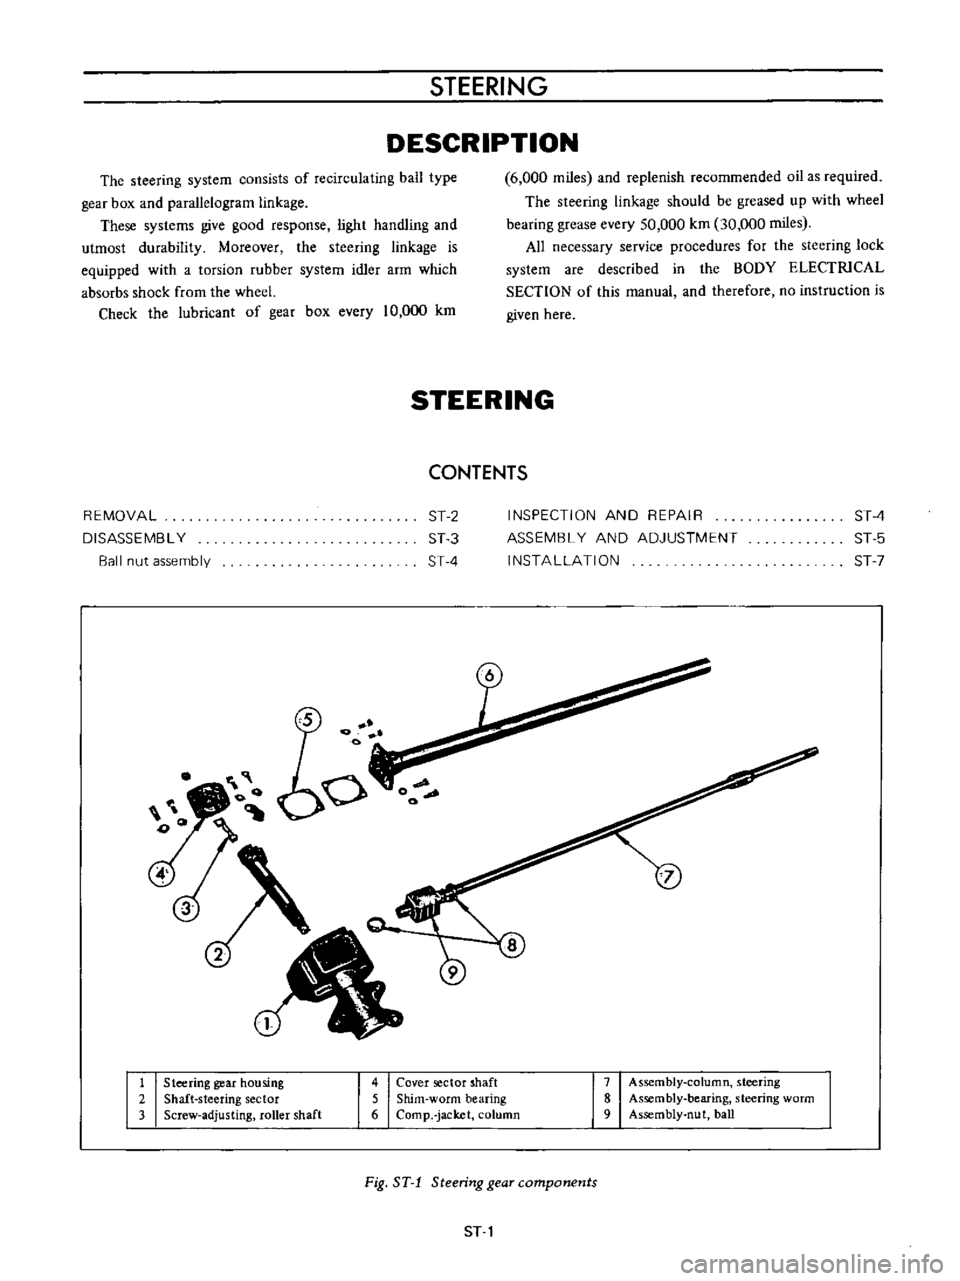 DATSUN B110 1973  Service Owners Manual 
STEERING

DESCRIPTION

The

steering 
system 
consists

of

recirculating 
ball

type

gear 
box

and

parallelogram 
linkage

These

systems 
give 
good

response 
light 
handling 
and

utmost 
dura